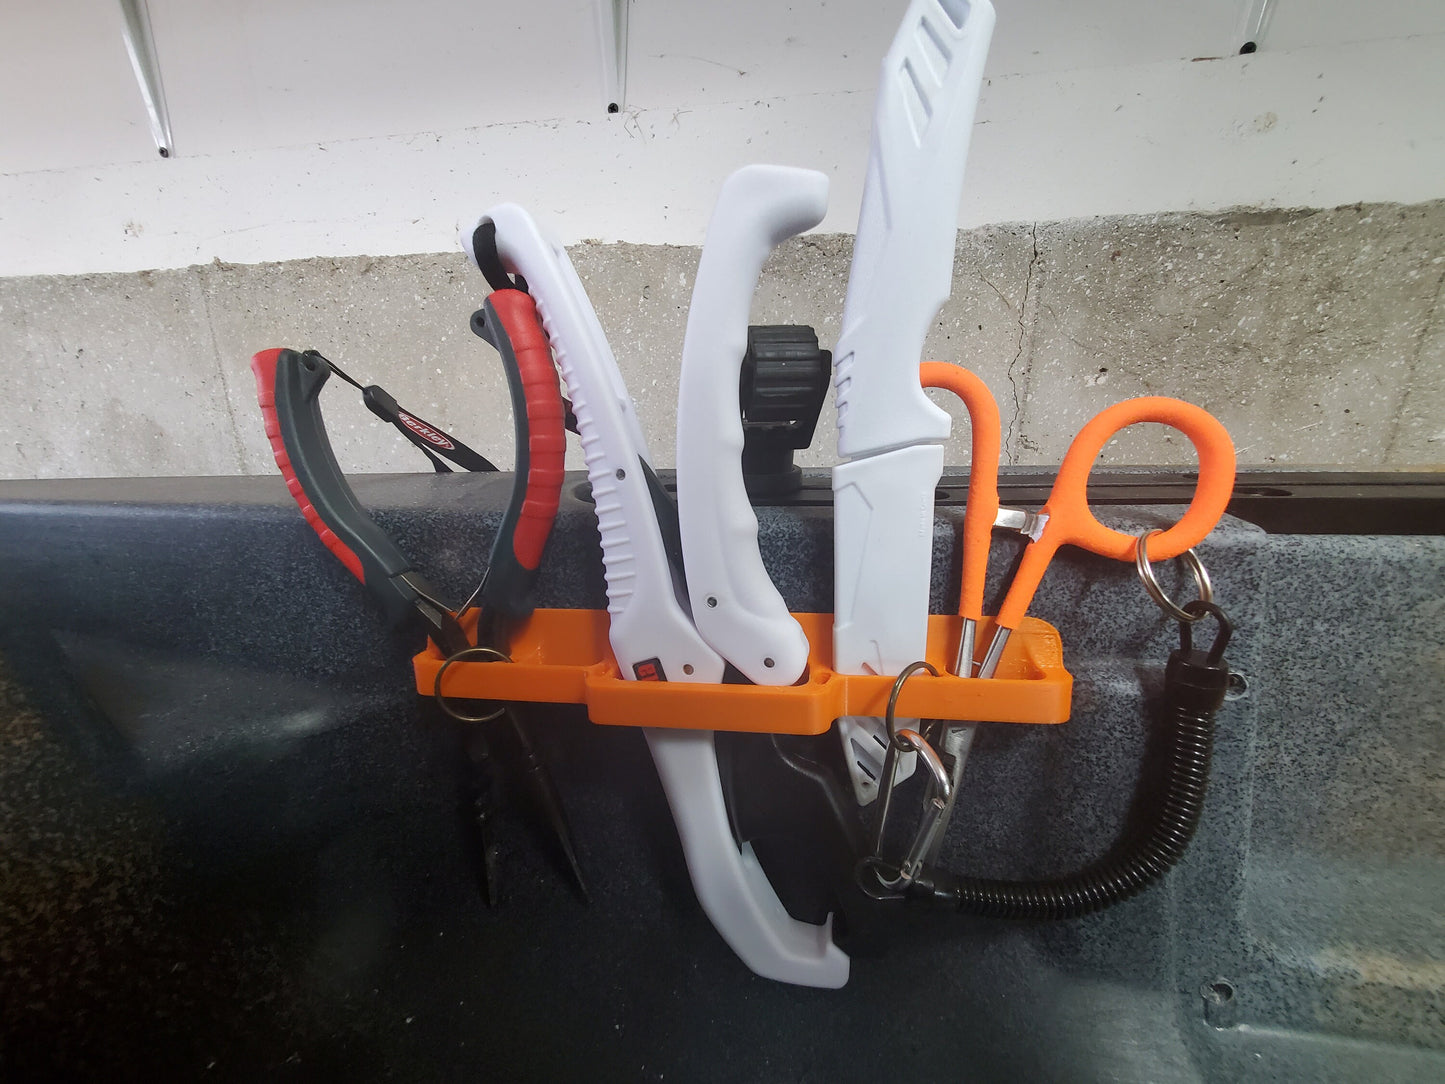 image of universal toool holder mounted on a kayak with tools